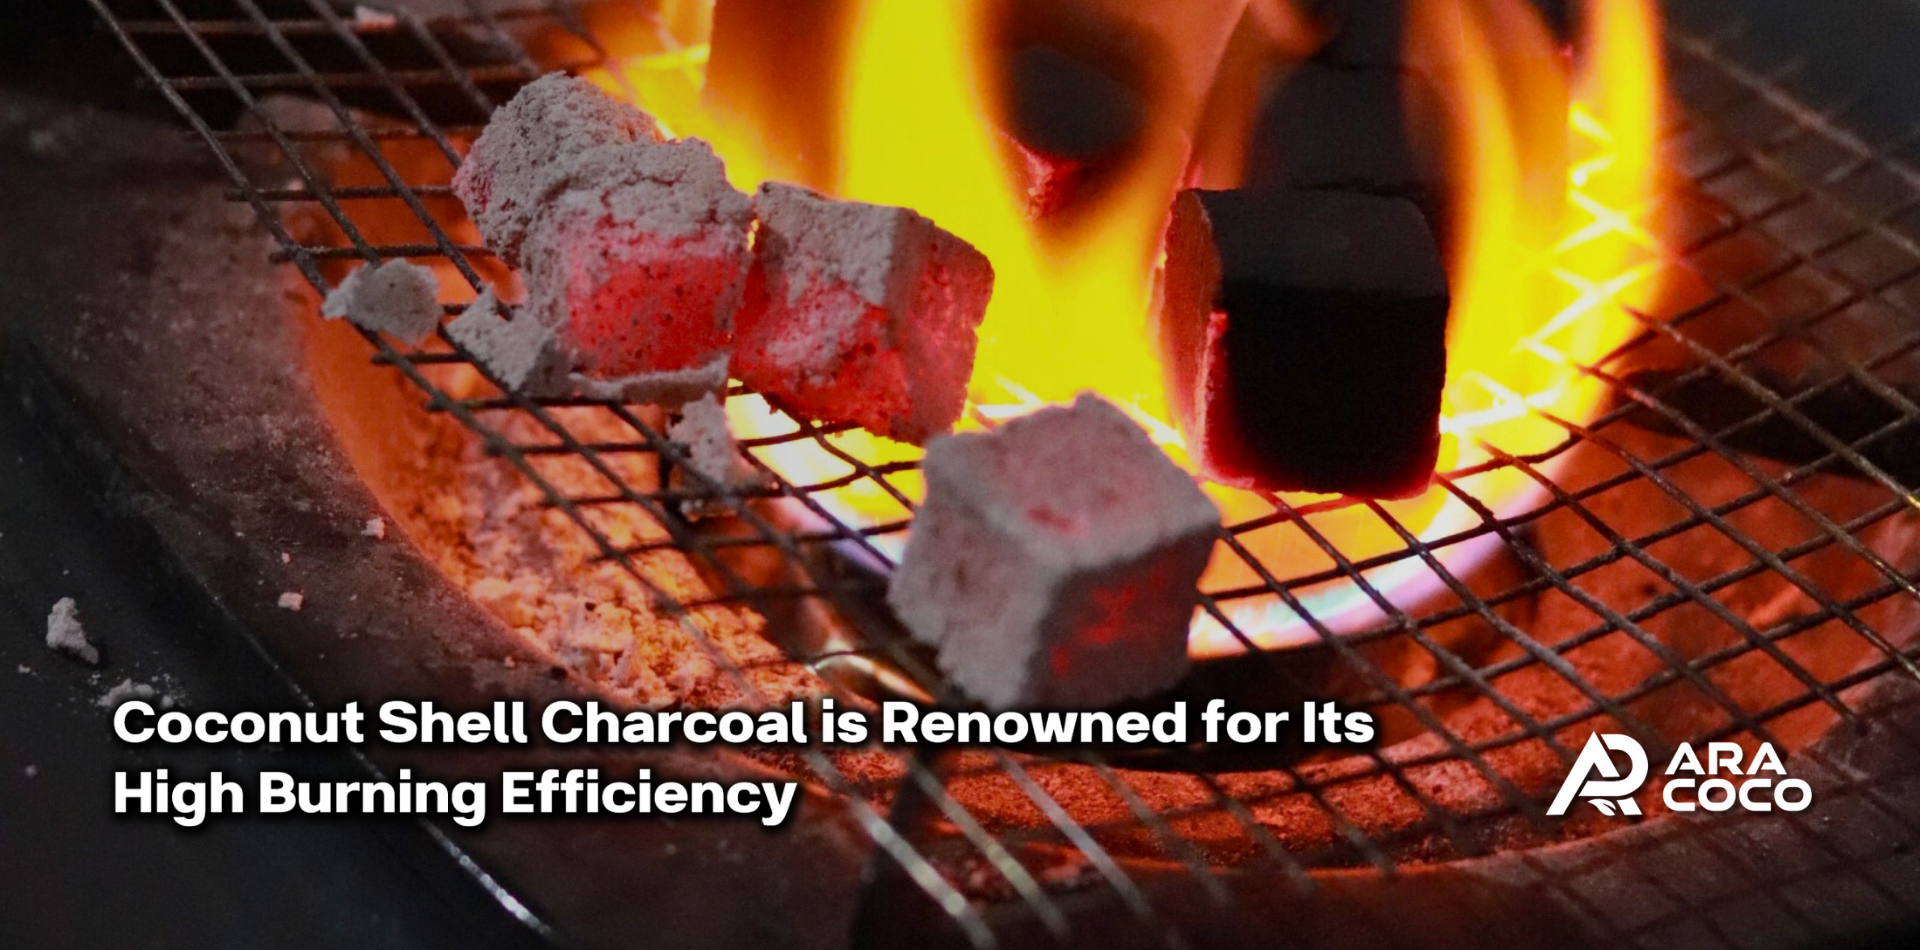 Coconut shell charcoal is renowned for its high burning efficiency.